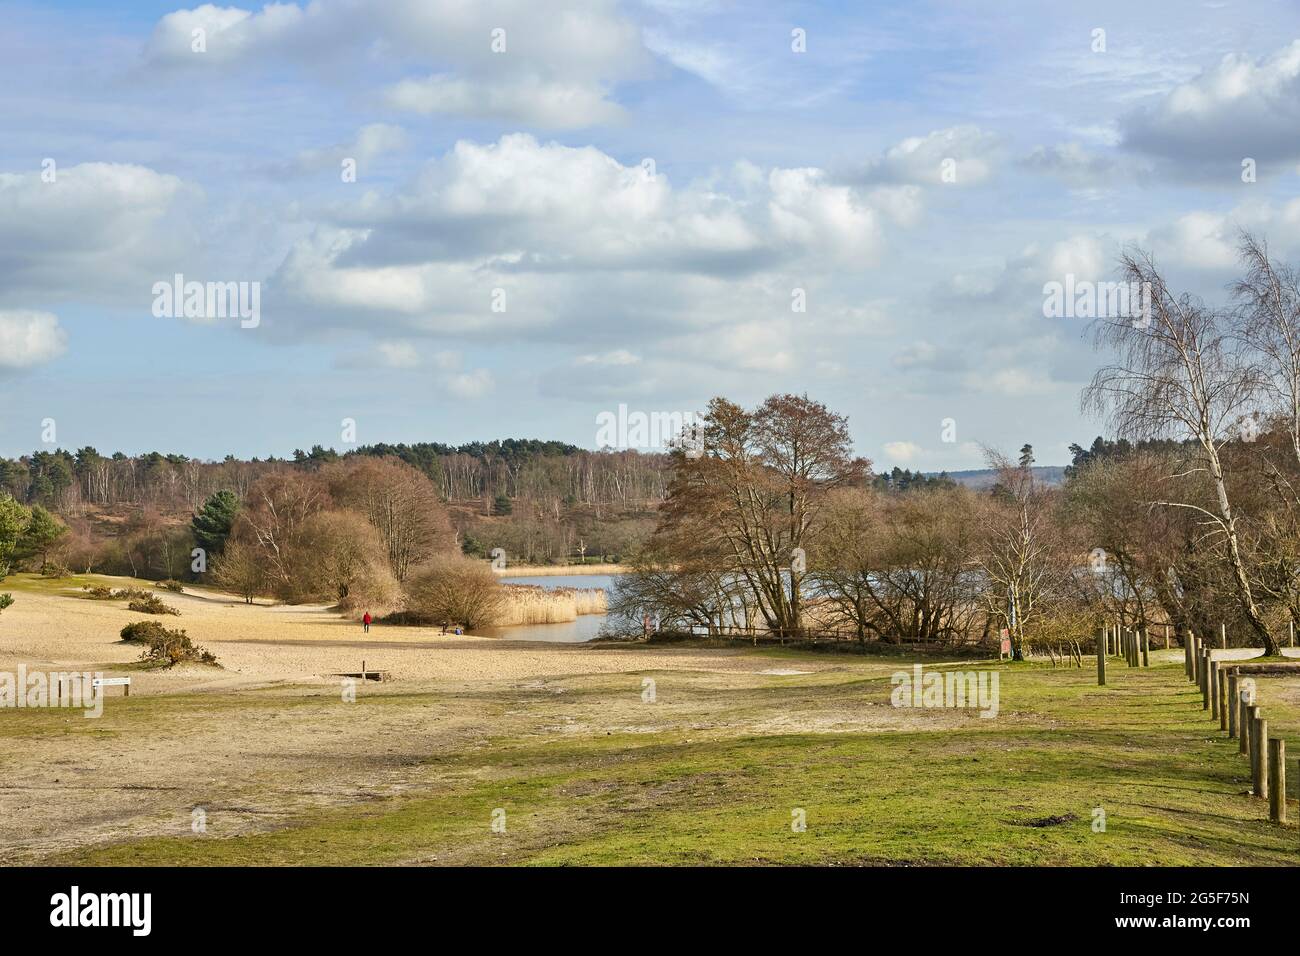 Scenery at Frensham Great Pond, Frensham Common, Waverley, Surrey, UK, with lake and sandy beach area, a local beauty spot and recreational area Stock Photo